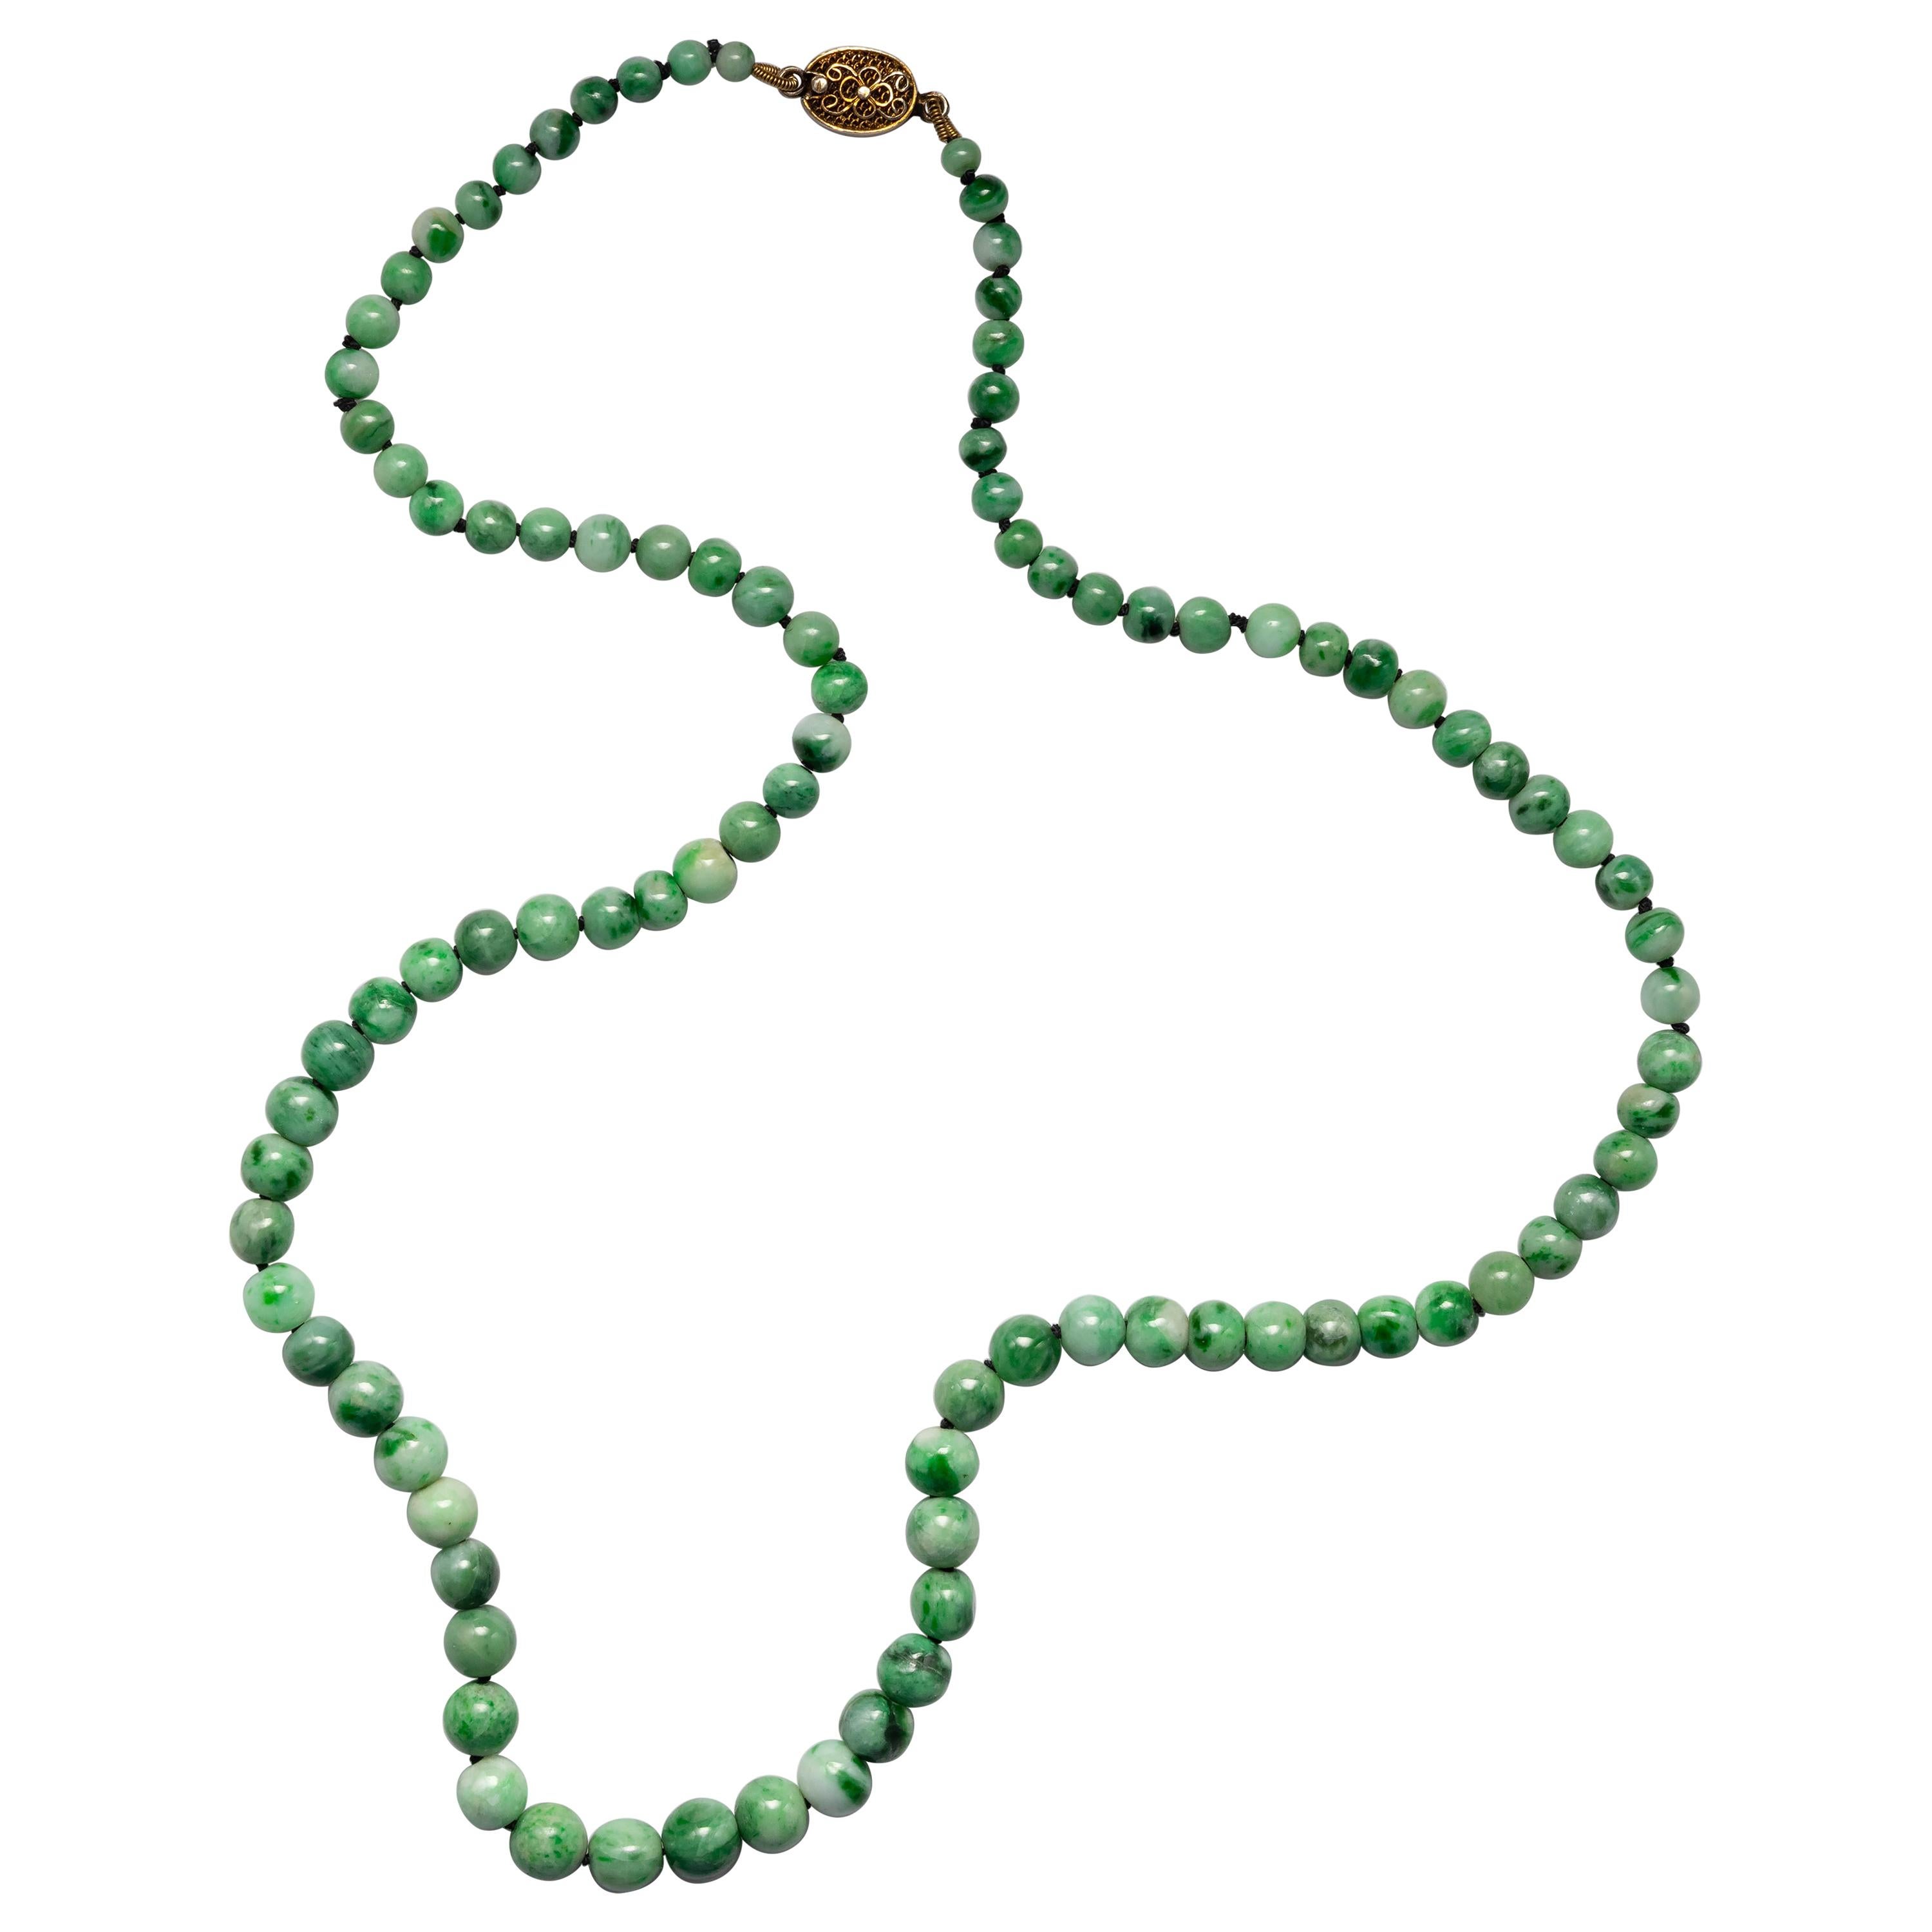 Jade Necklace circa 1930s Variegated Green Certified Untreated